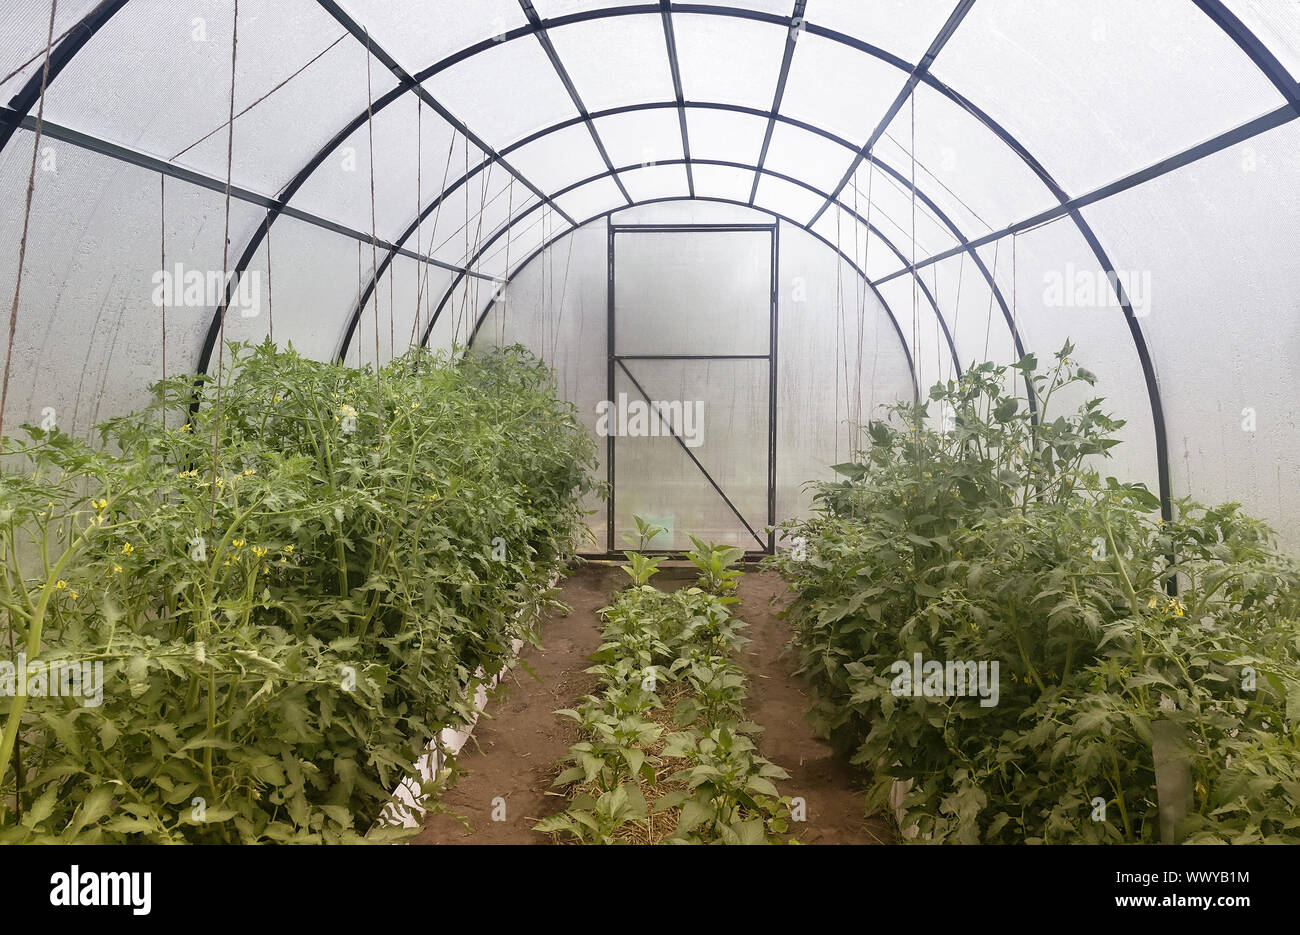 A small greenhouse for agricultural plants. Stock Photo